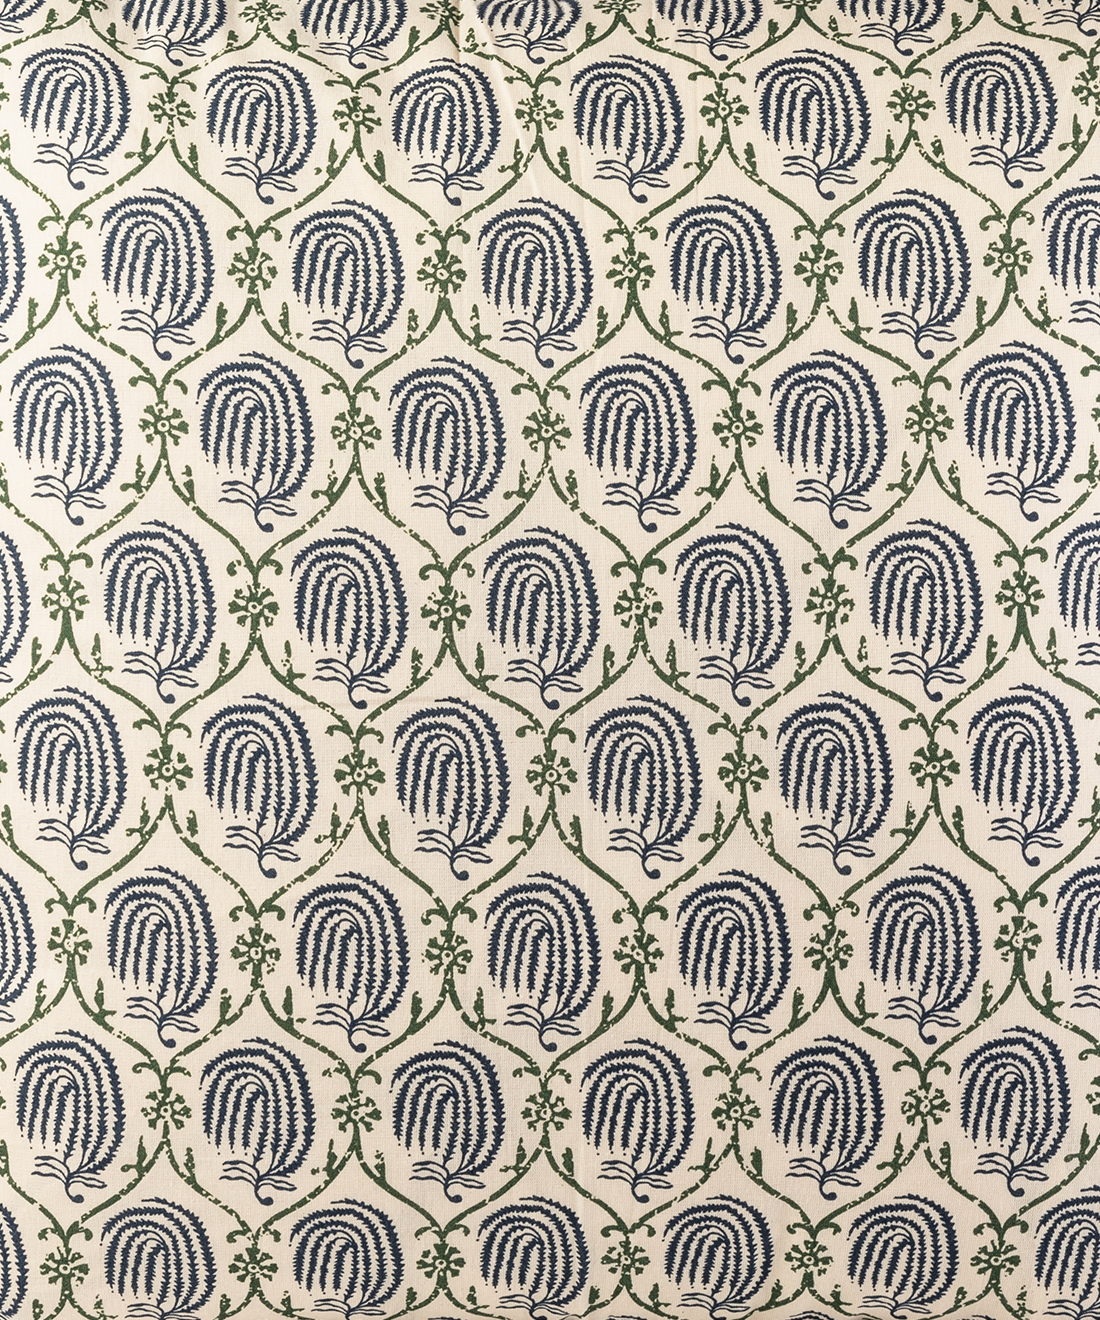 Whiteman & Mellor's Trellis in Blue, Cotton Fabric by the Meter